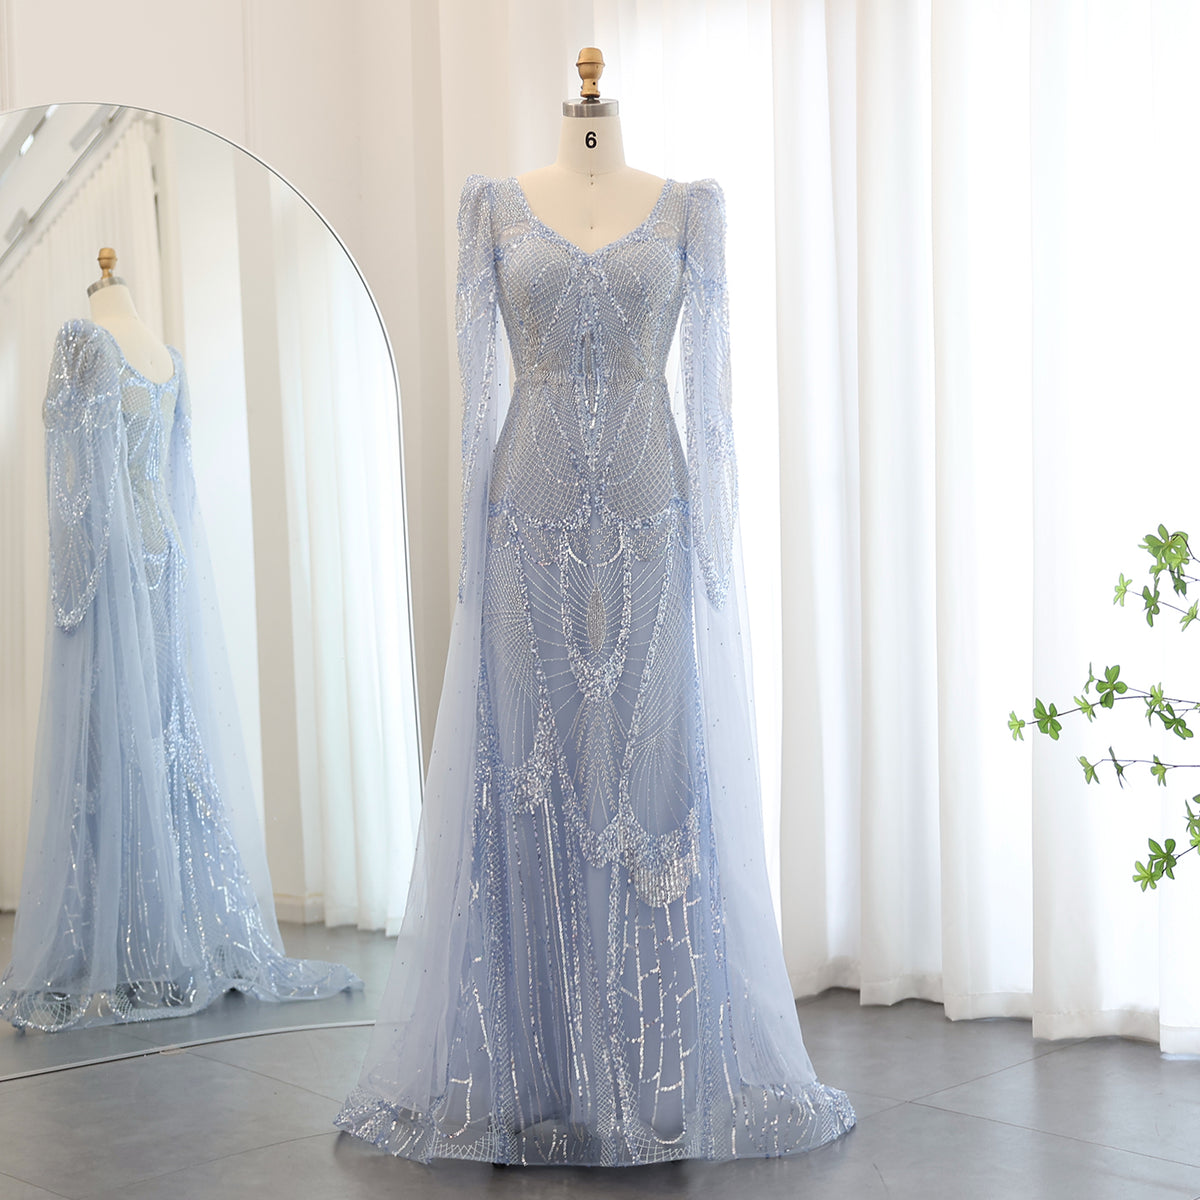 Sharon Said Luxury Mermaid Light Blue Evening Dresses with Cape Sleeves Elegant Plus Size Women Wedding Guest Party Gowns SS157